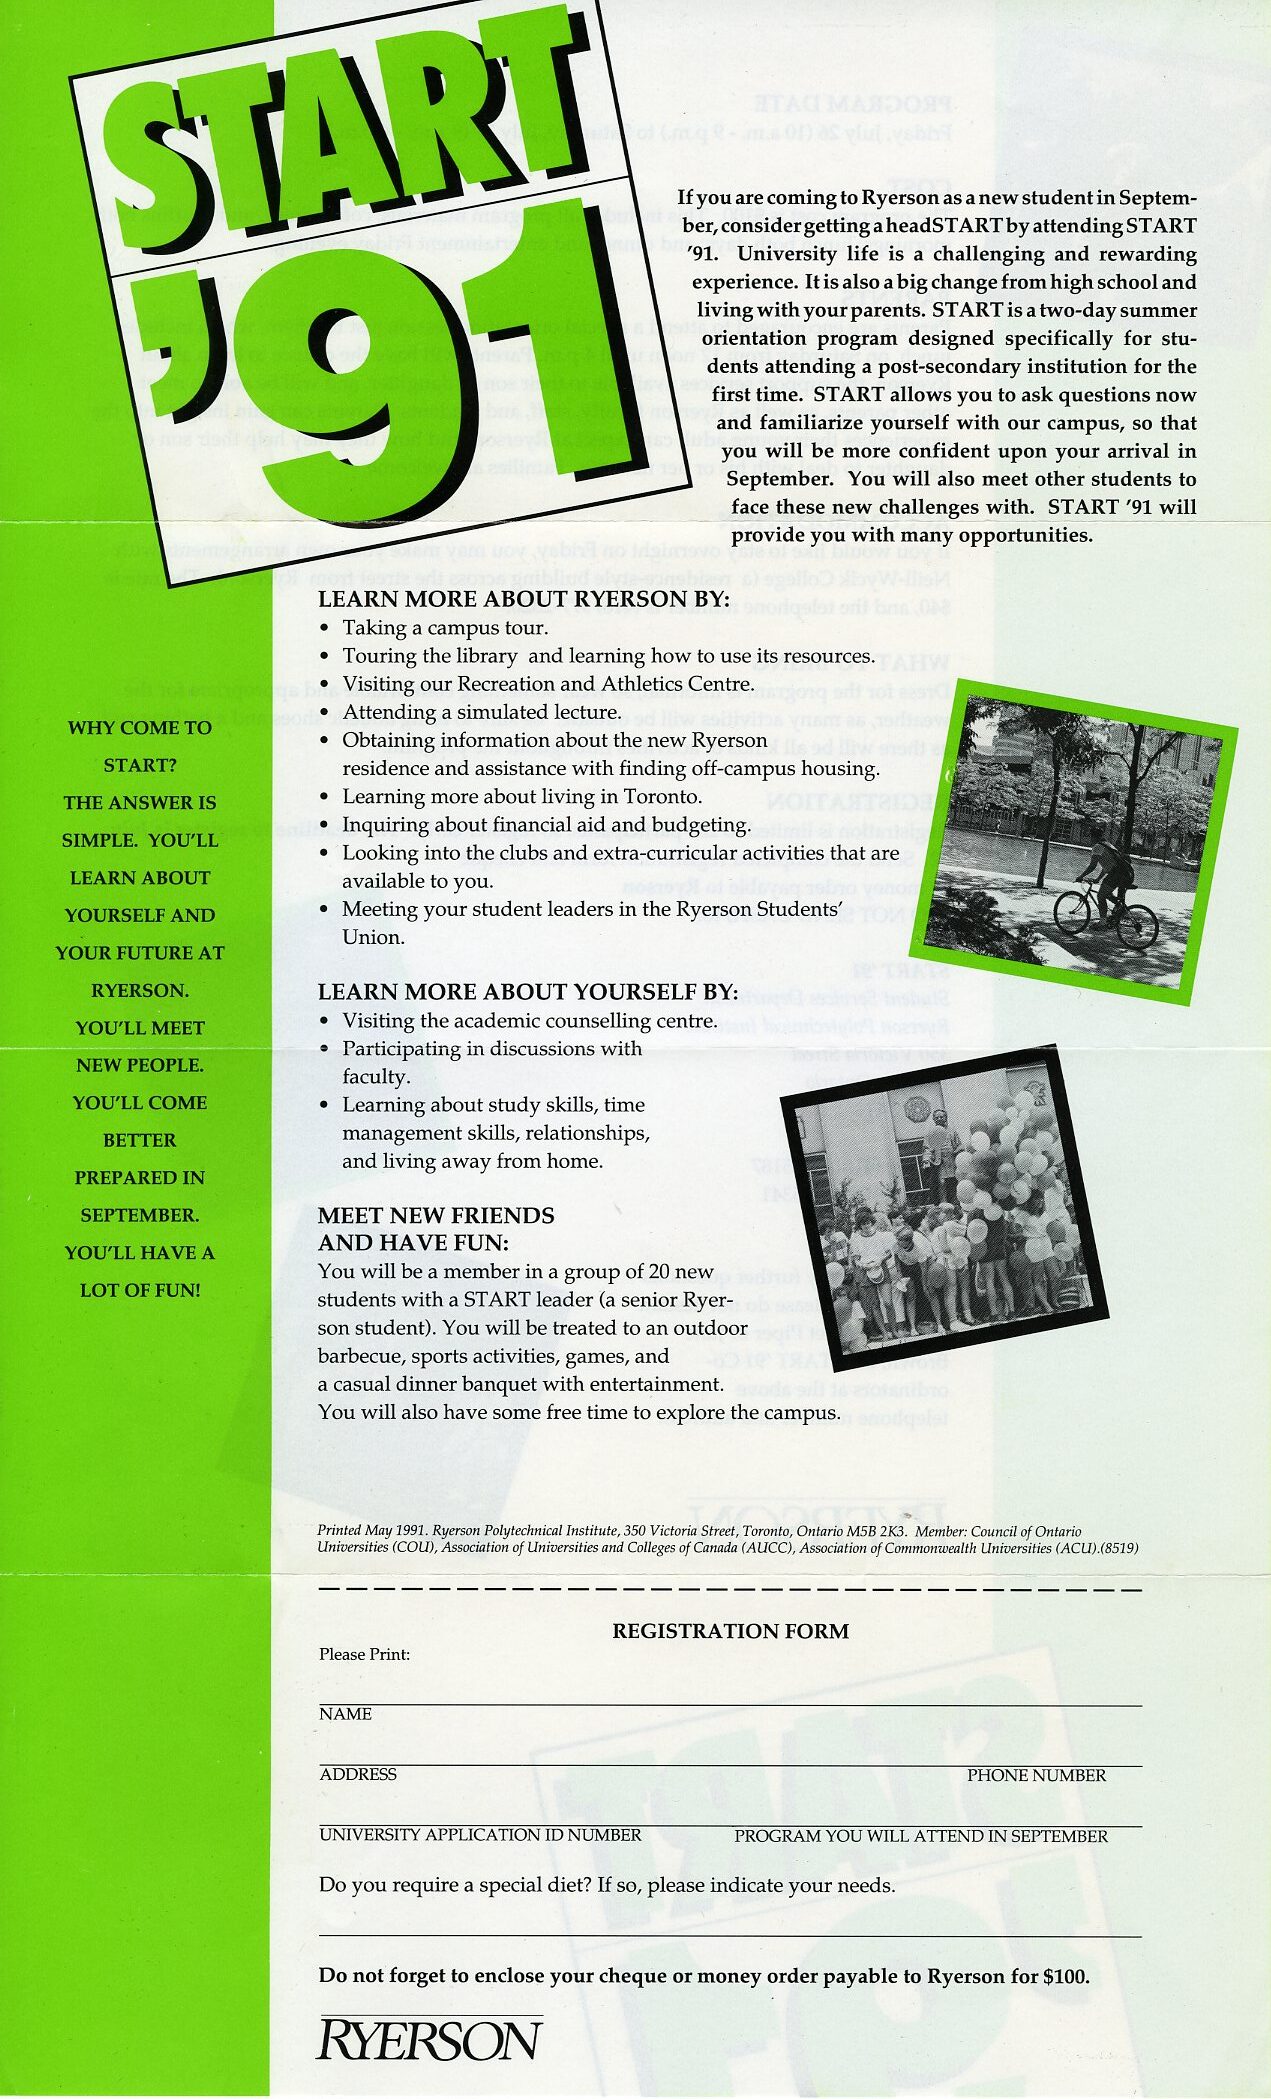 Brochure for Start 91 program with photographs and lists of activities